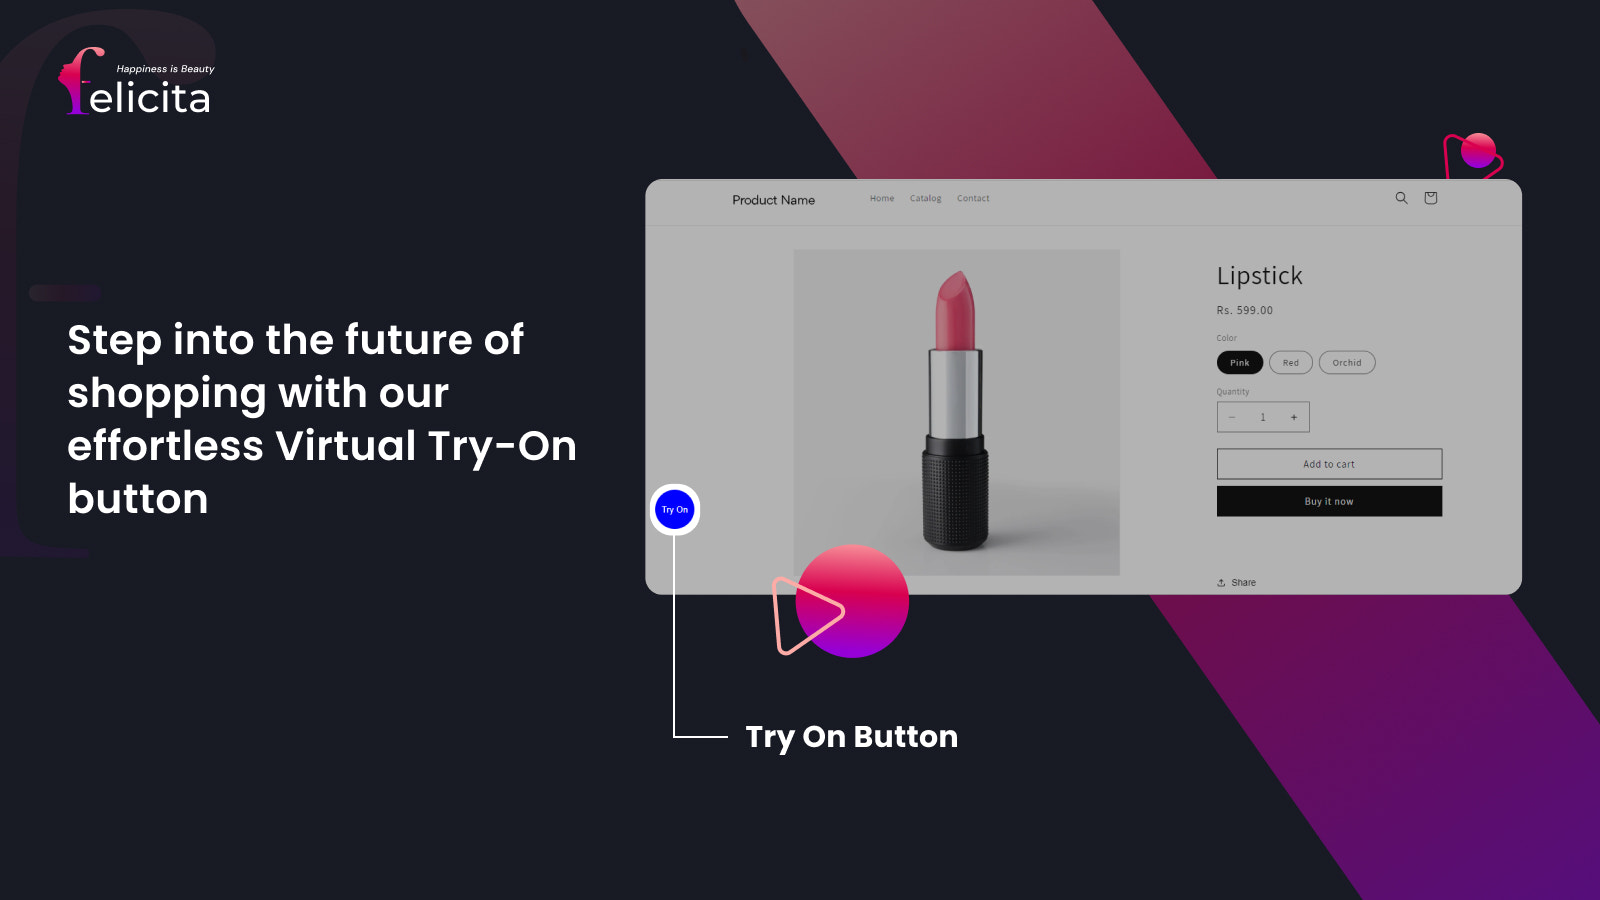 Step into the future of shopping with virtual our try-on button